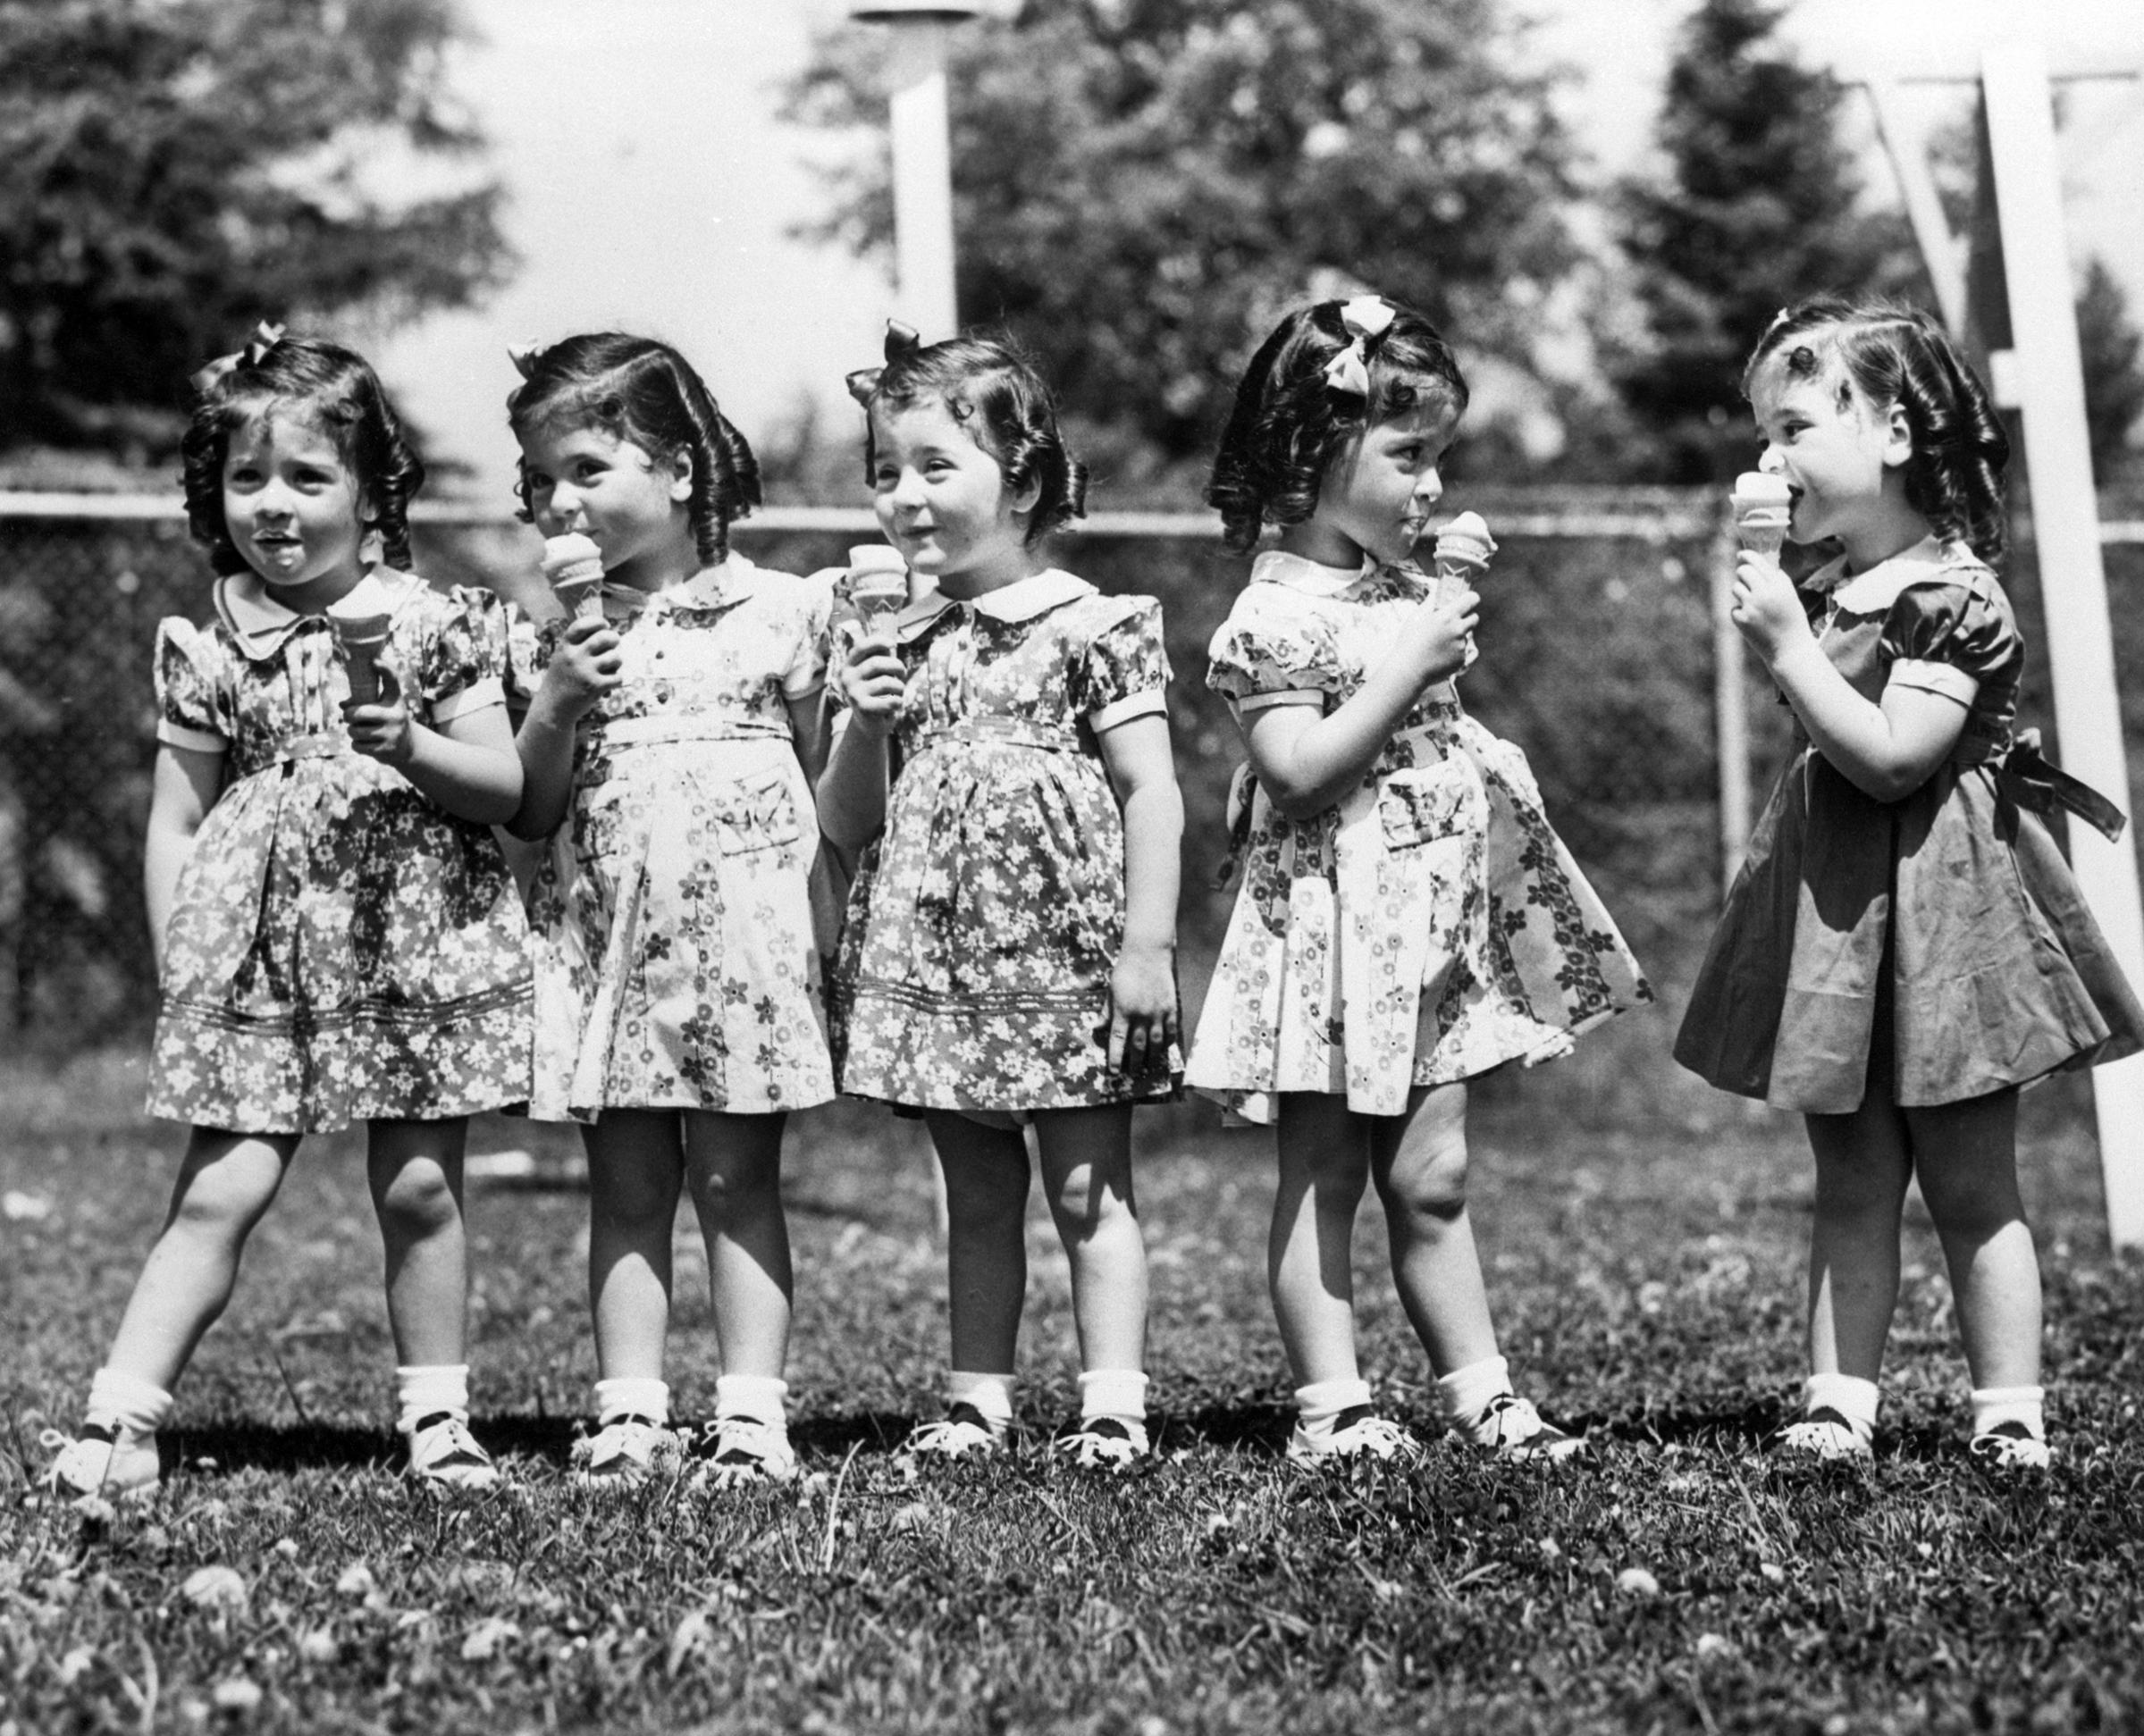 The Dionne quintuplets on their 4th birthday in Callender, Ontario, May 28, 1938. Left to right: Emilie, Annette, Marie, Cecile and Yvonne.